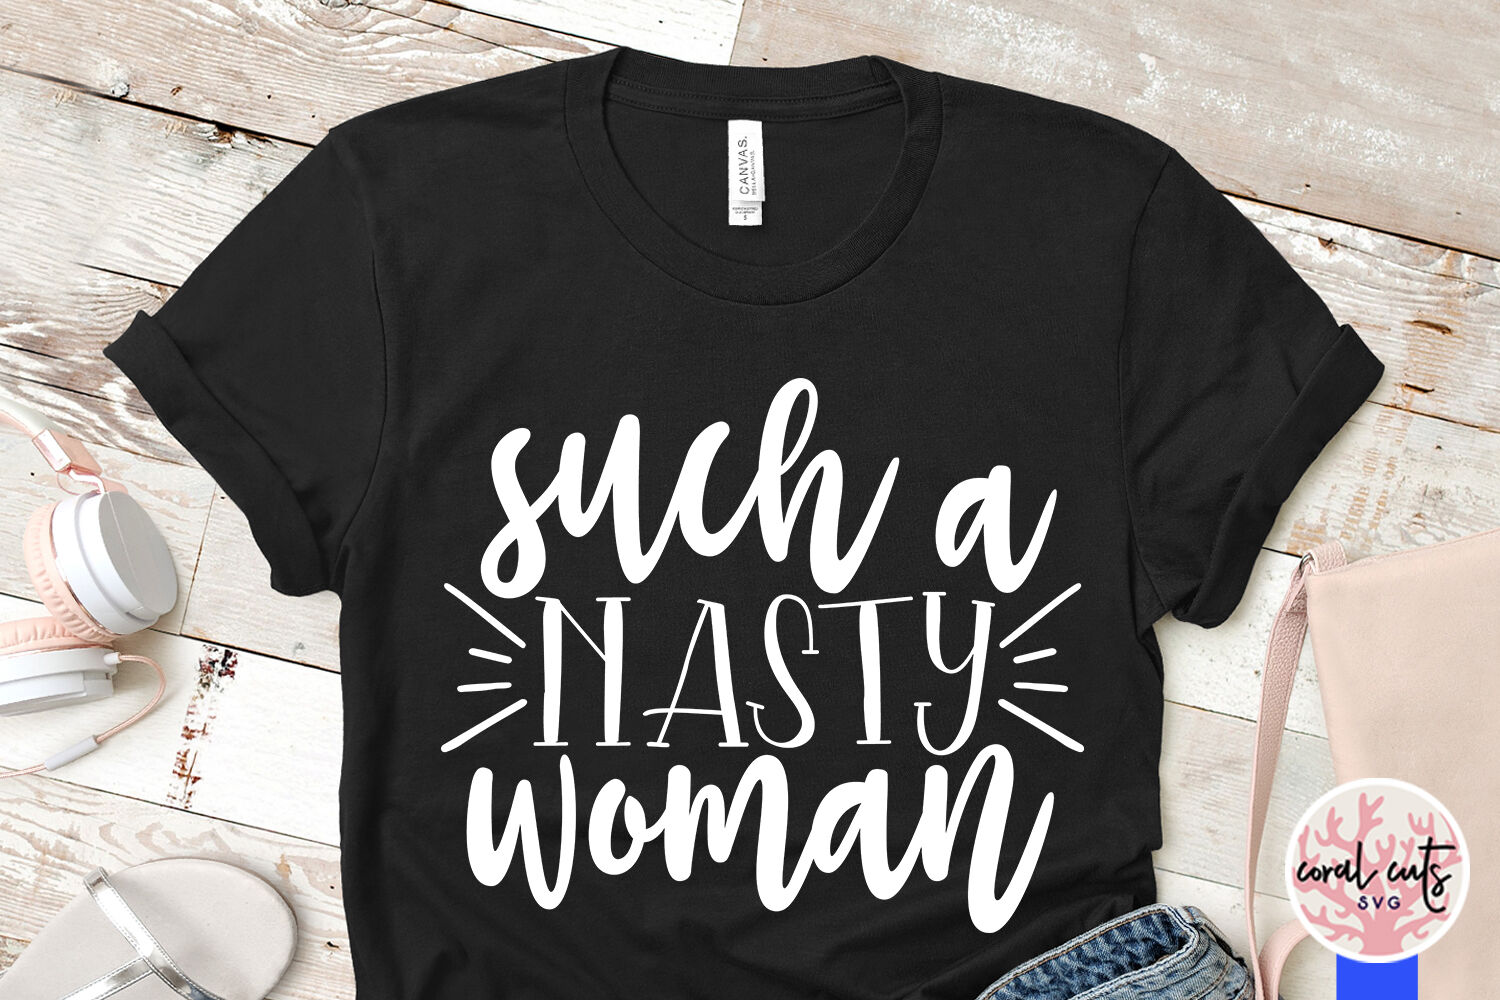 Download Such a nasty woman - Women Empowerment SVG EPS DXF PNG By ...